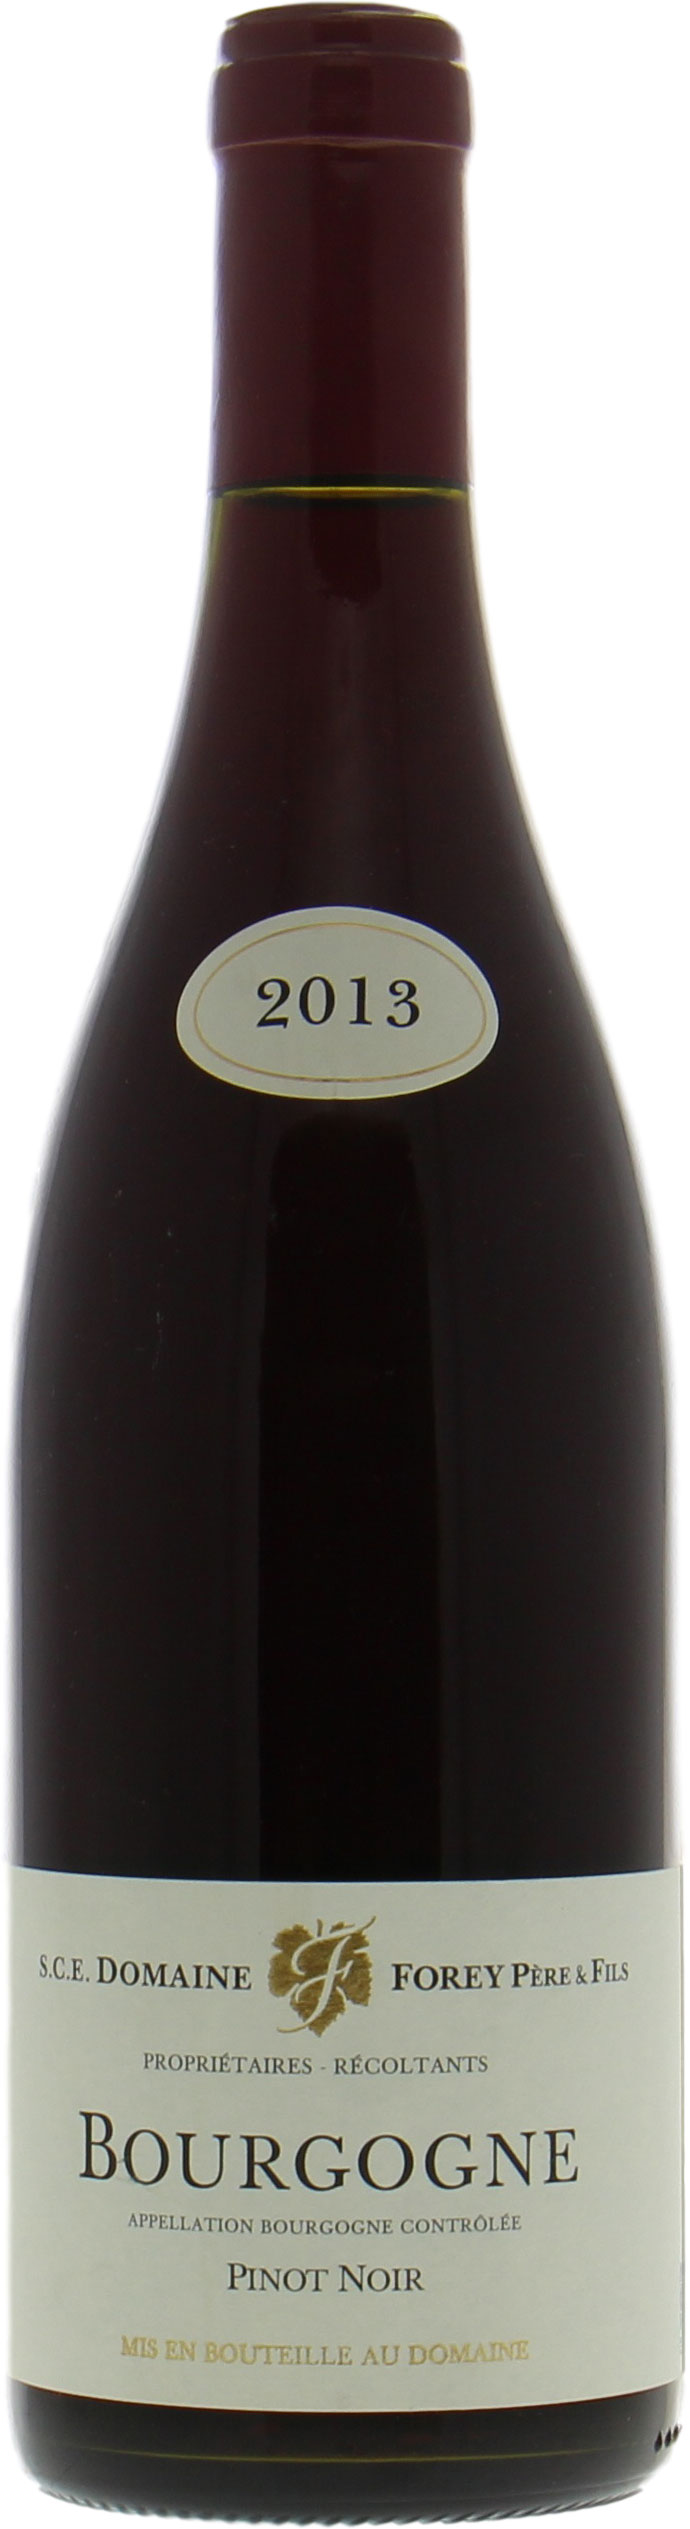 Domaine Forey Pere & Fils - Bourgogne Pinot Noir 2013 Perfect